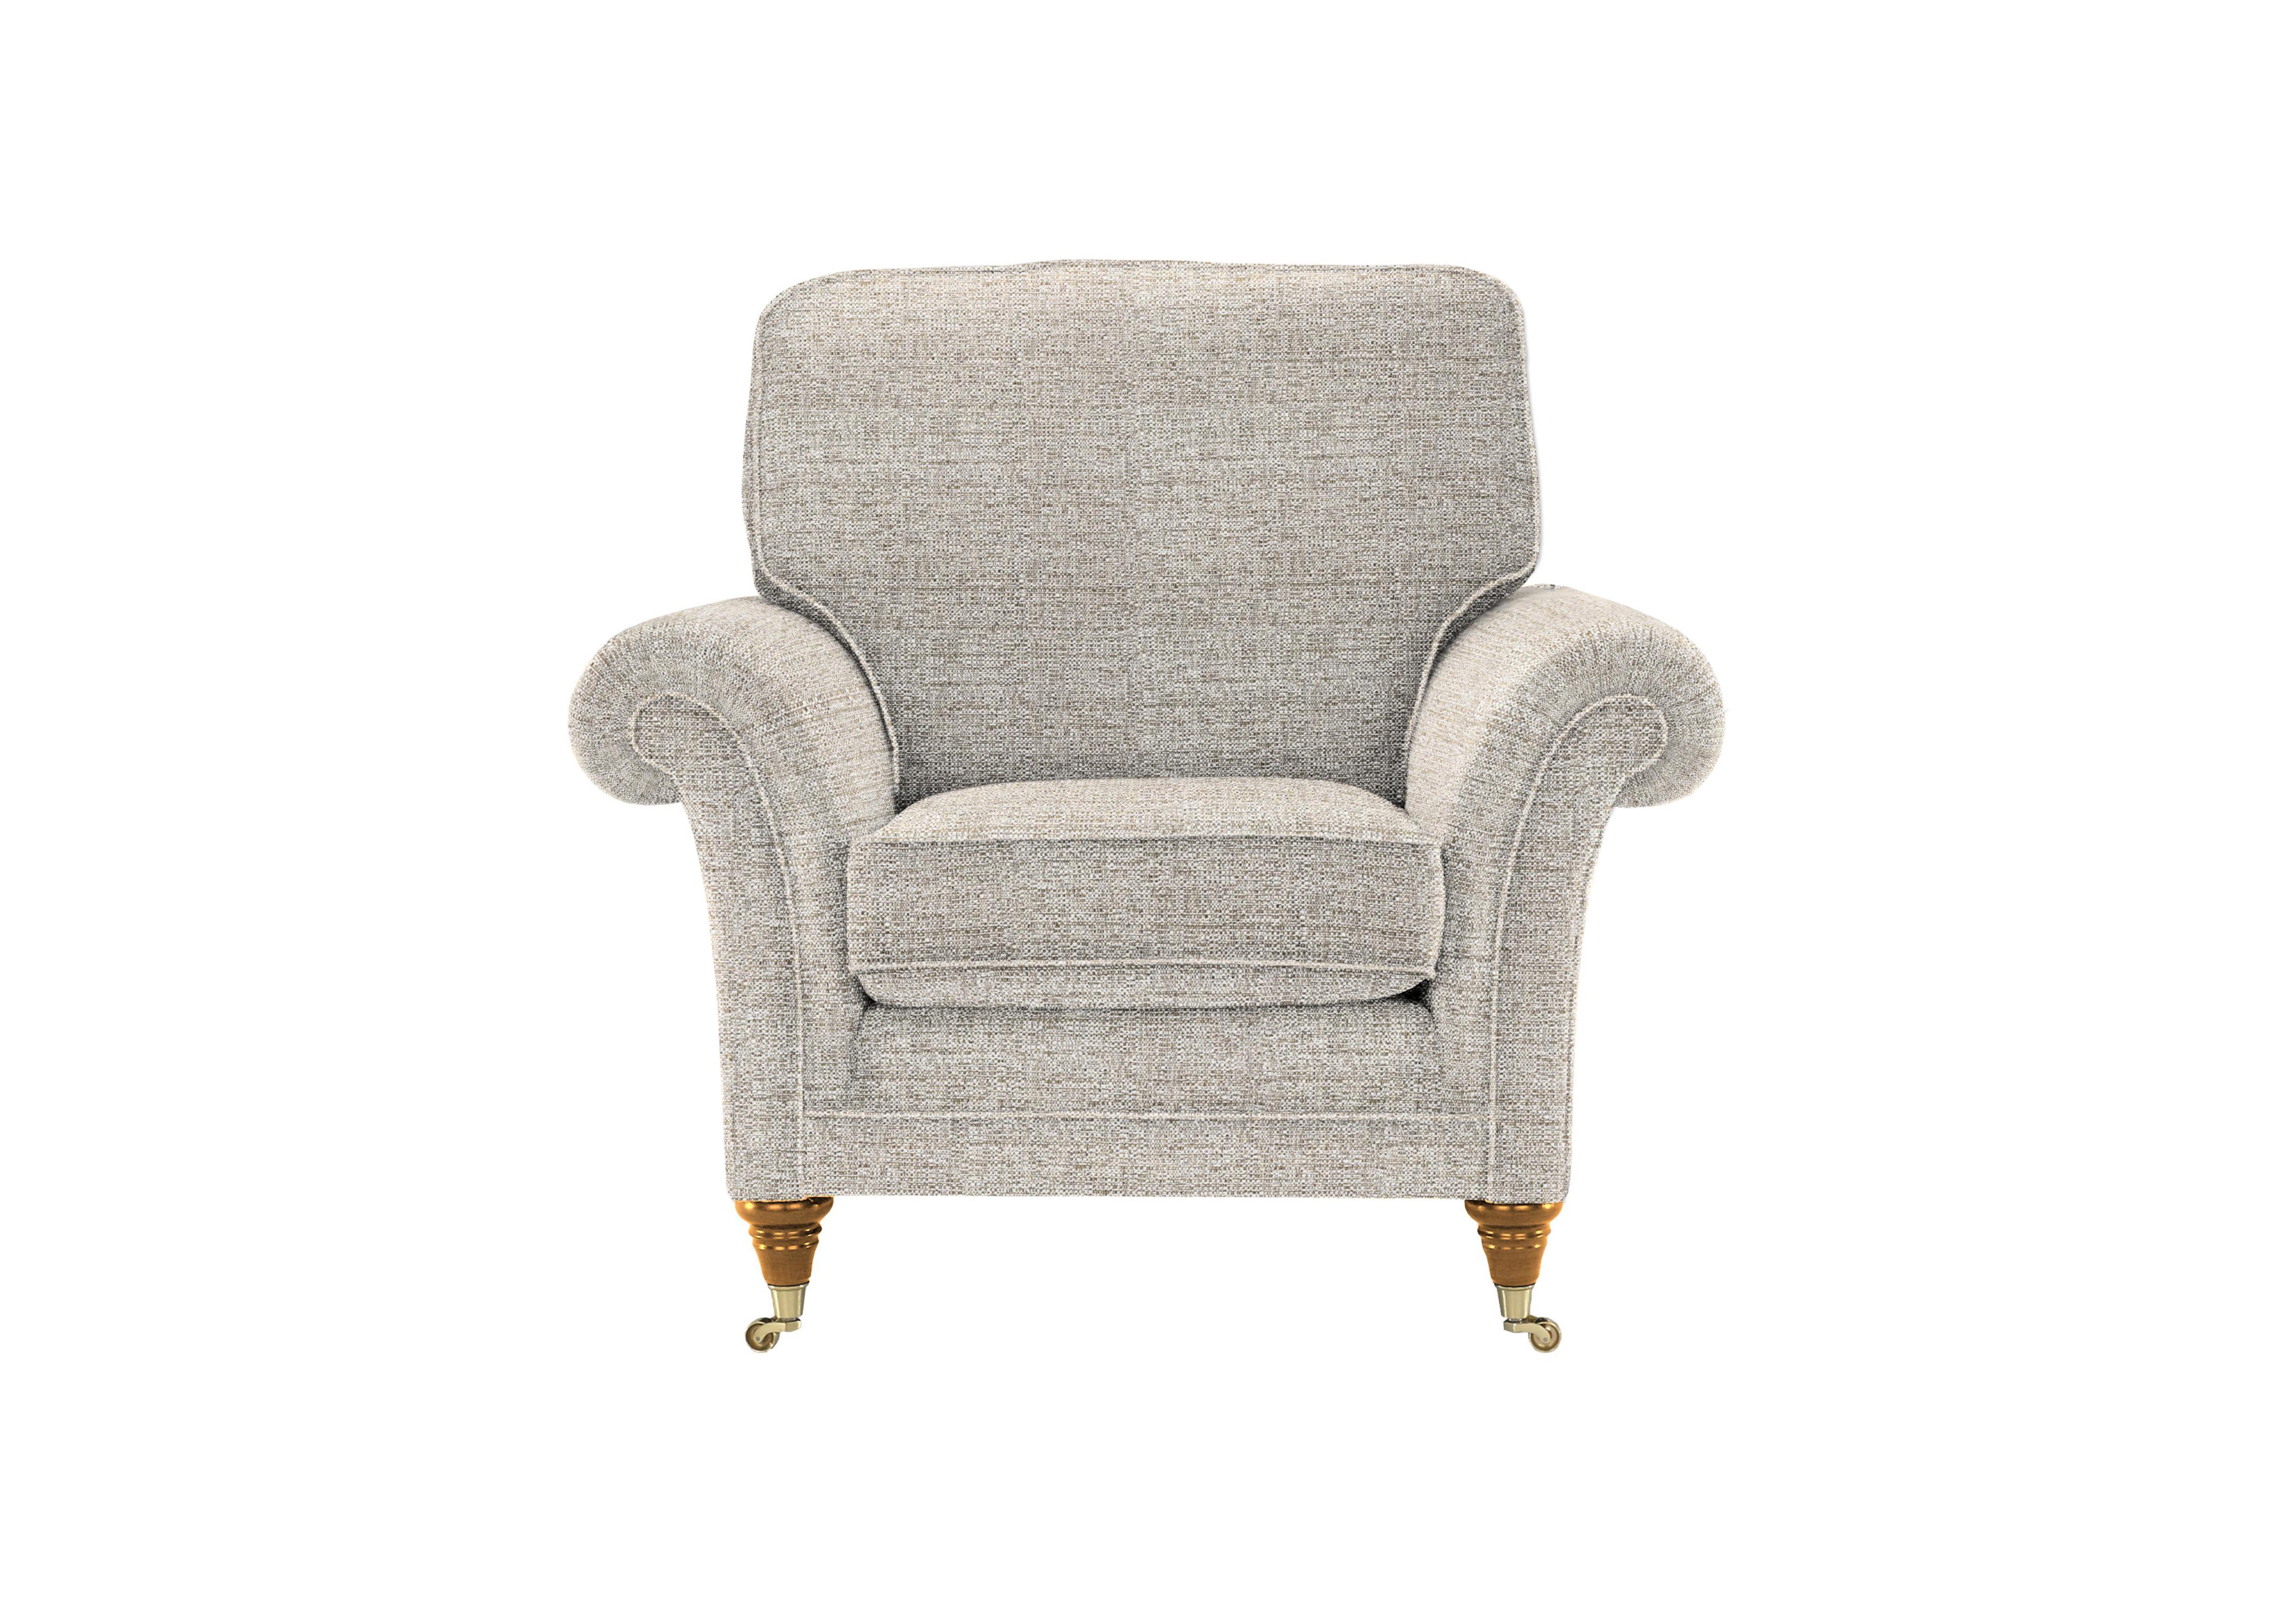 Burghley Fabric Armchair in 1300-0059 Caledonian Pebble on Furniture Village